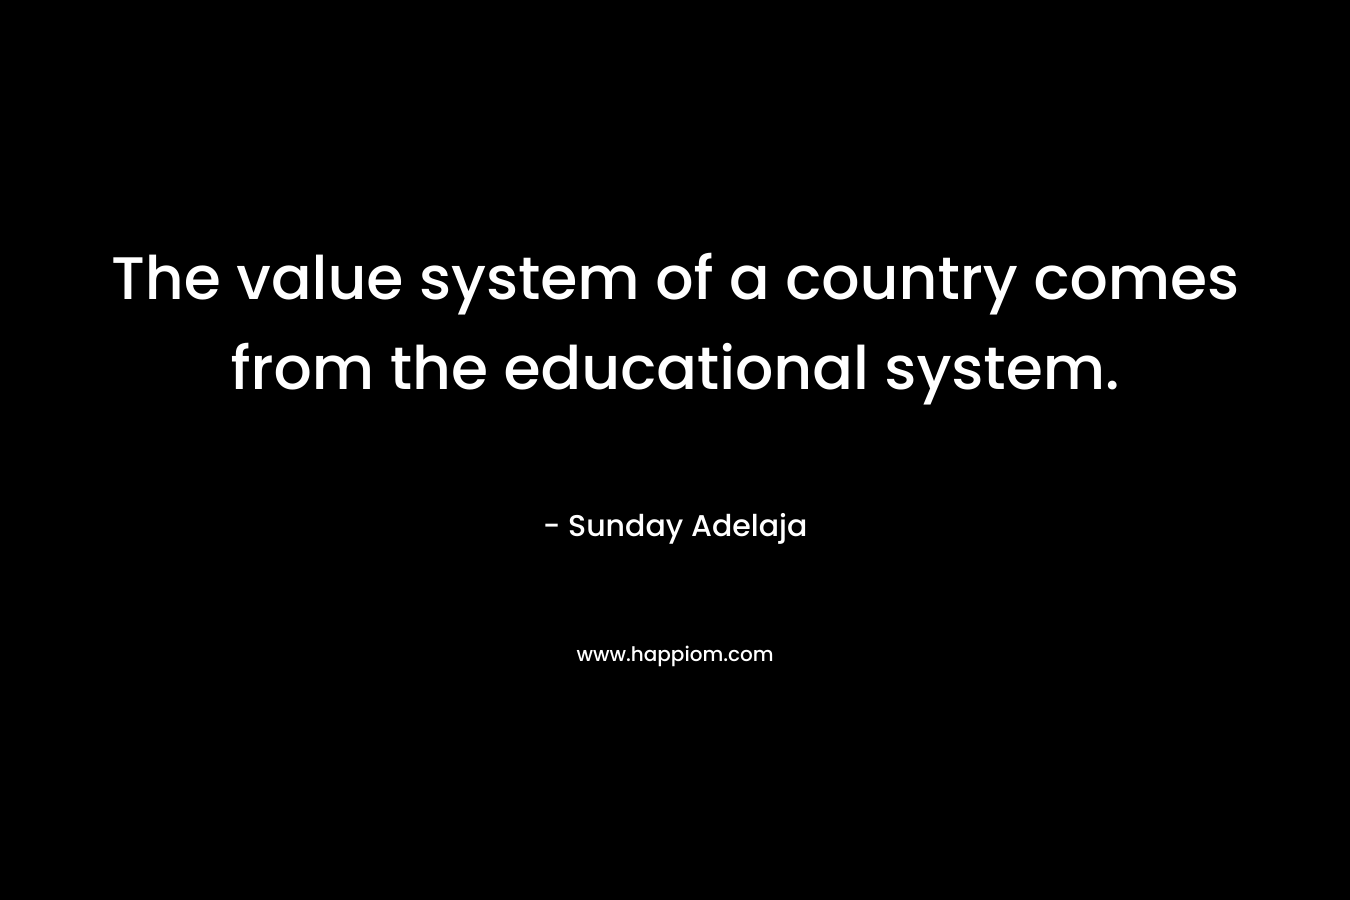 The value system of a country comes from the educational system.